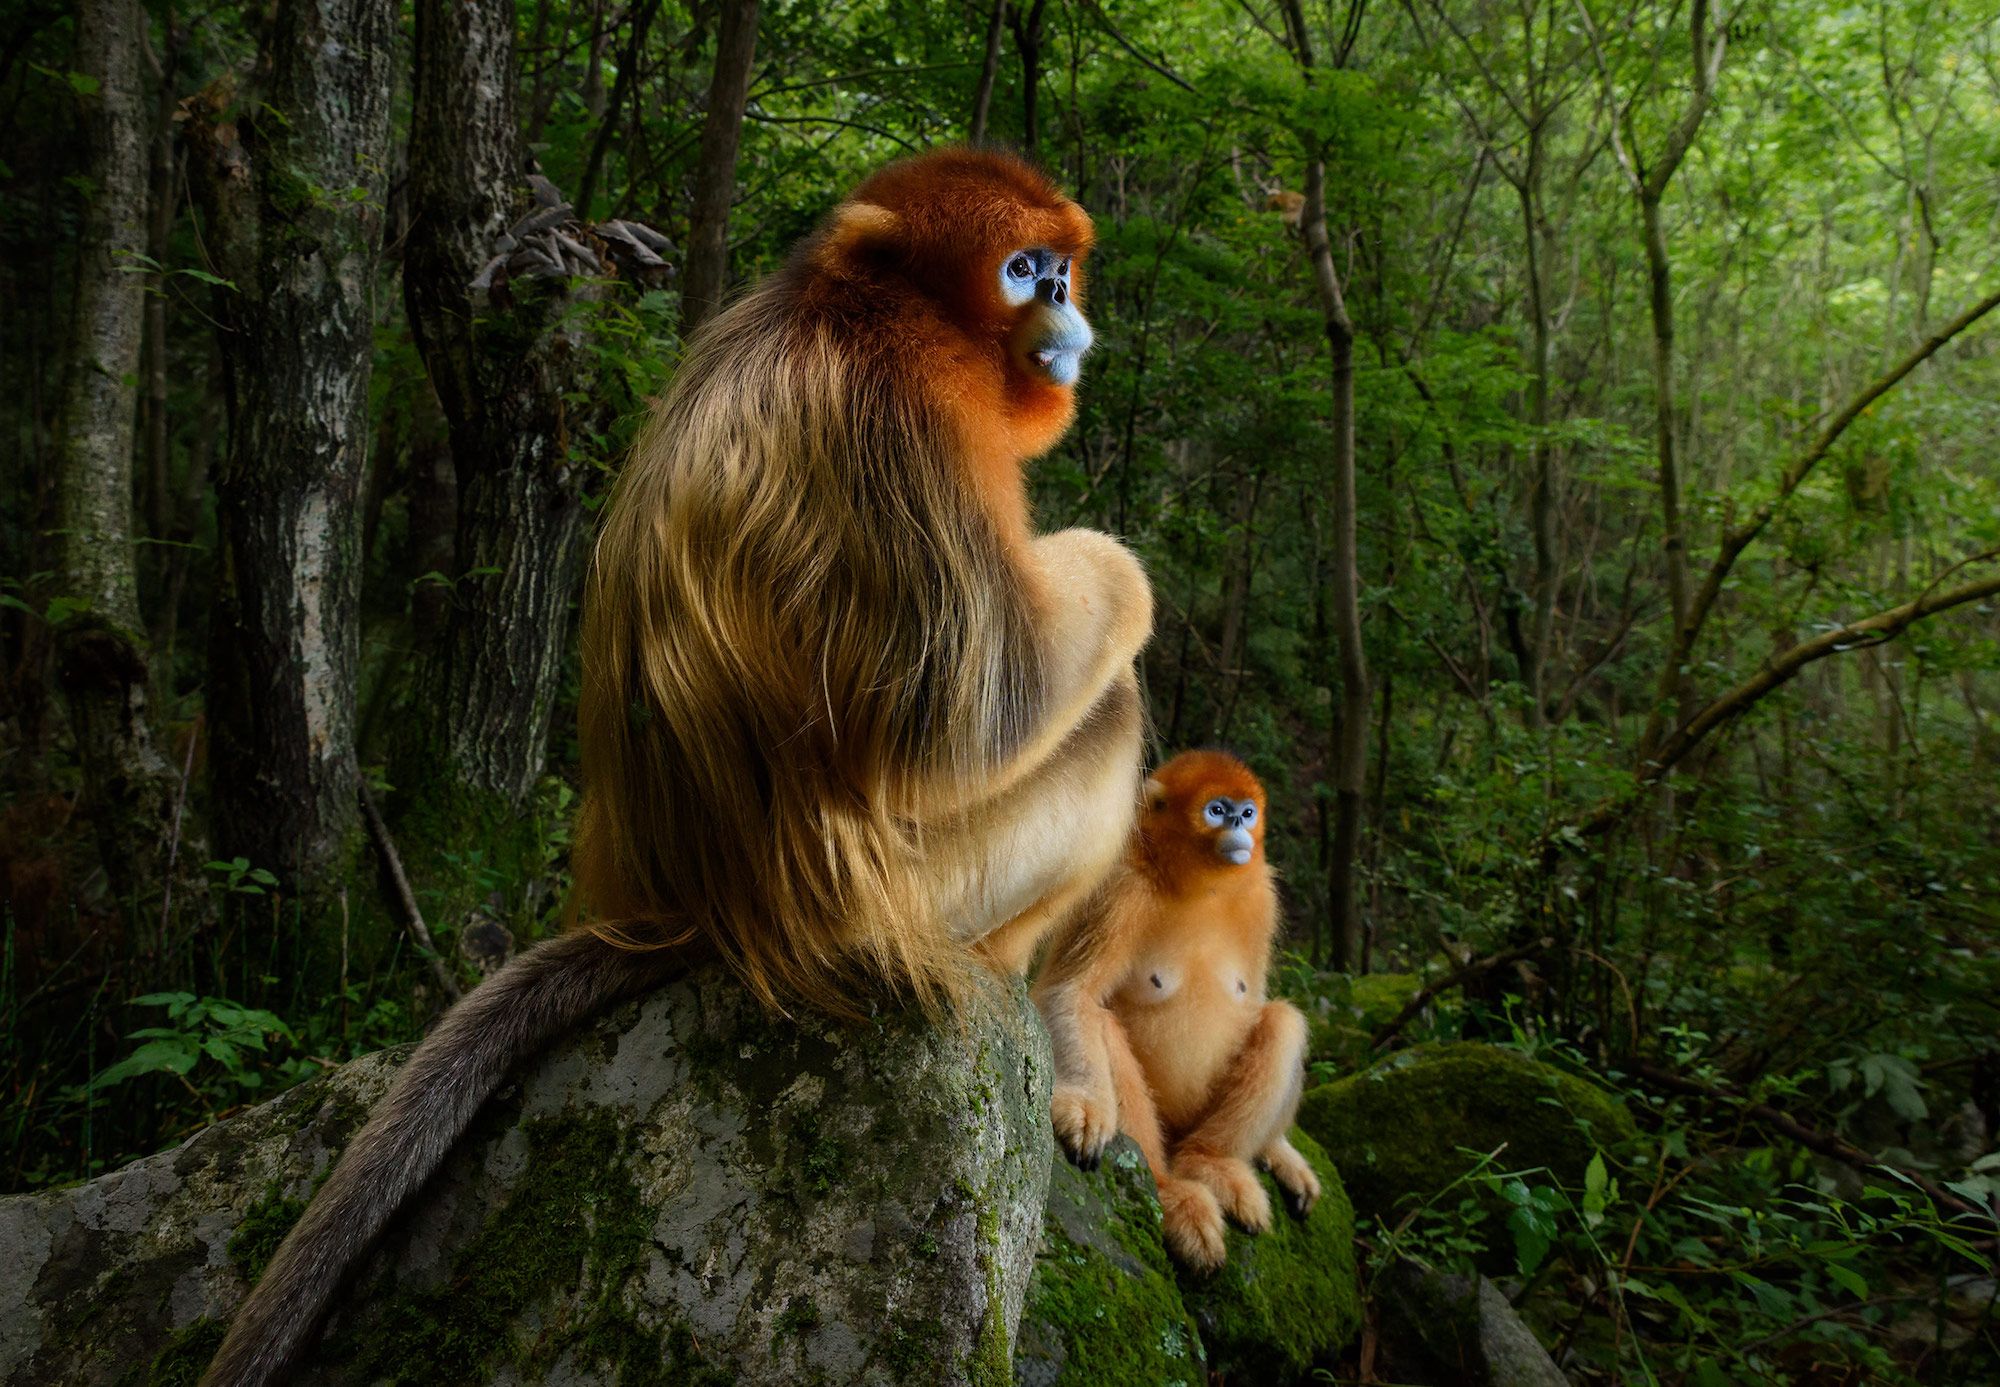 Wildlife Photographer of the Year 2018 is Marsel van Oosten for this portrait of two monkeys